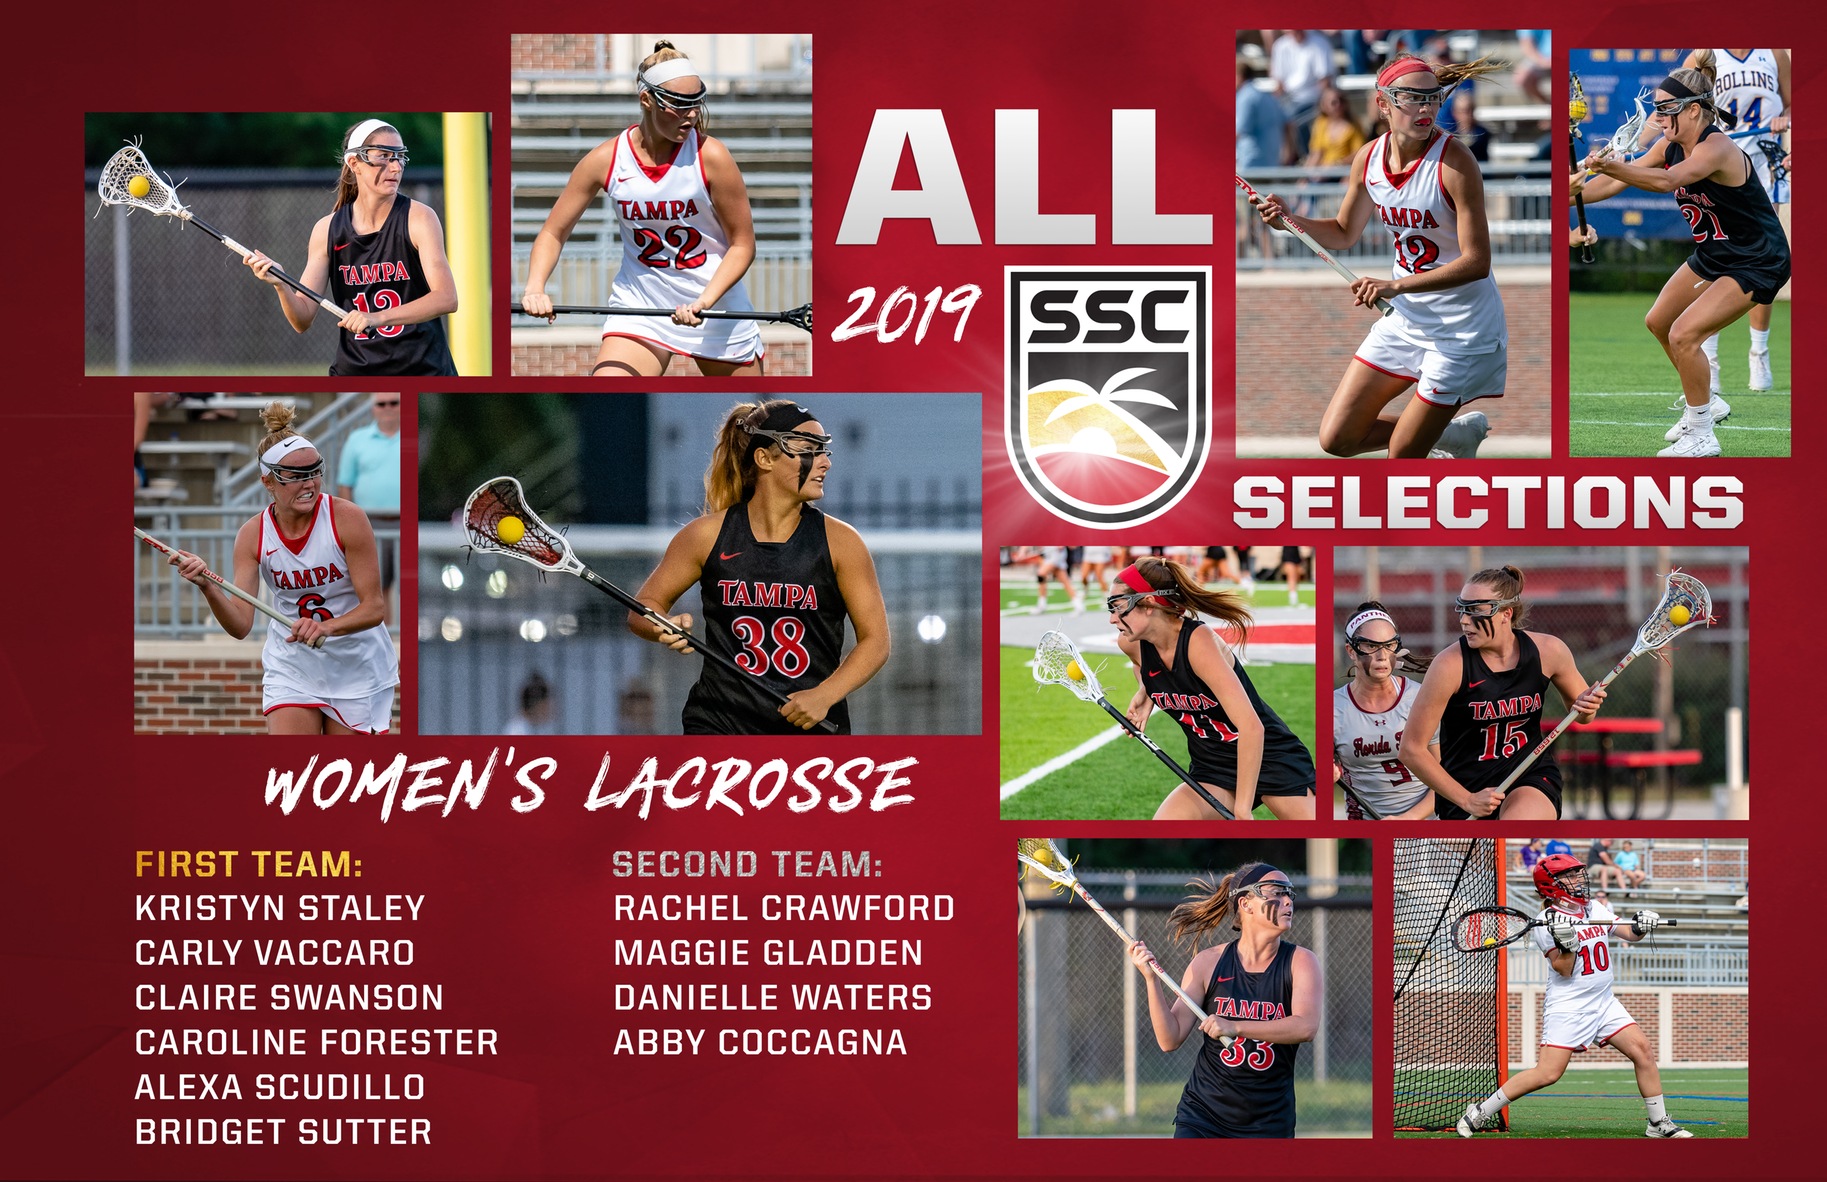 2019 ALL-SSC Selections, Swanson and Gallagher Earn Player and Coach of the Year